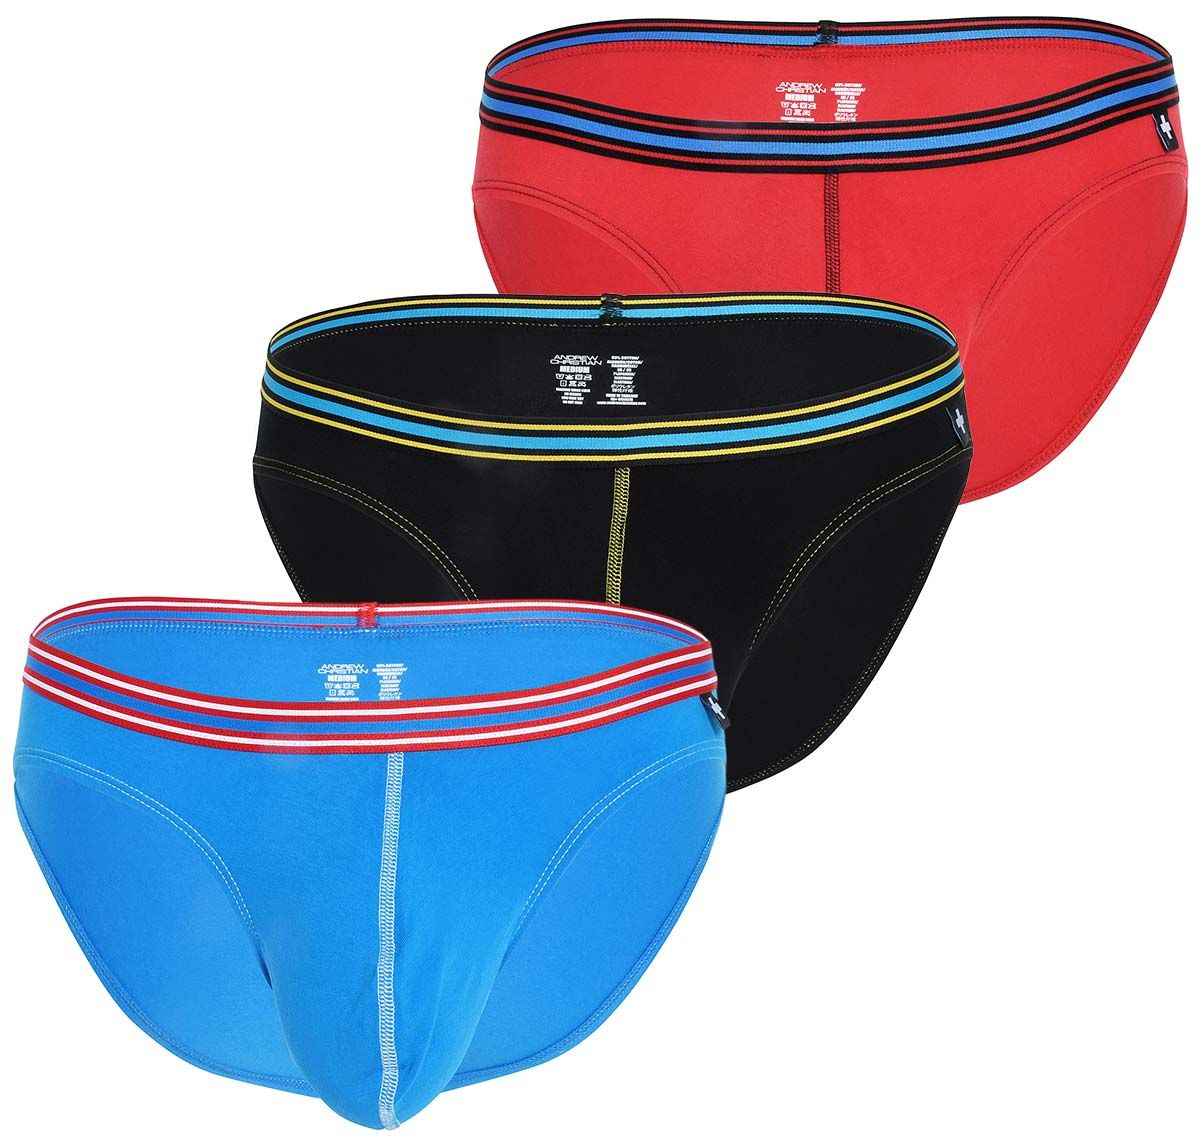 Andrew Christian Pack of 3 Briefs BOY BRIEF SUPERHERO 3-PACK 92279, black/blue/red